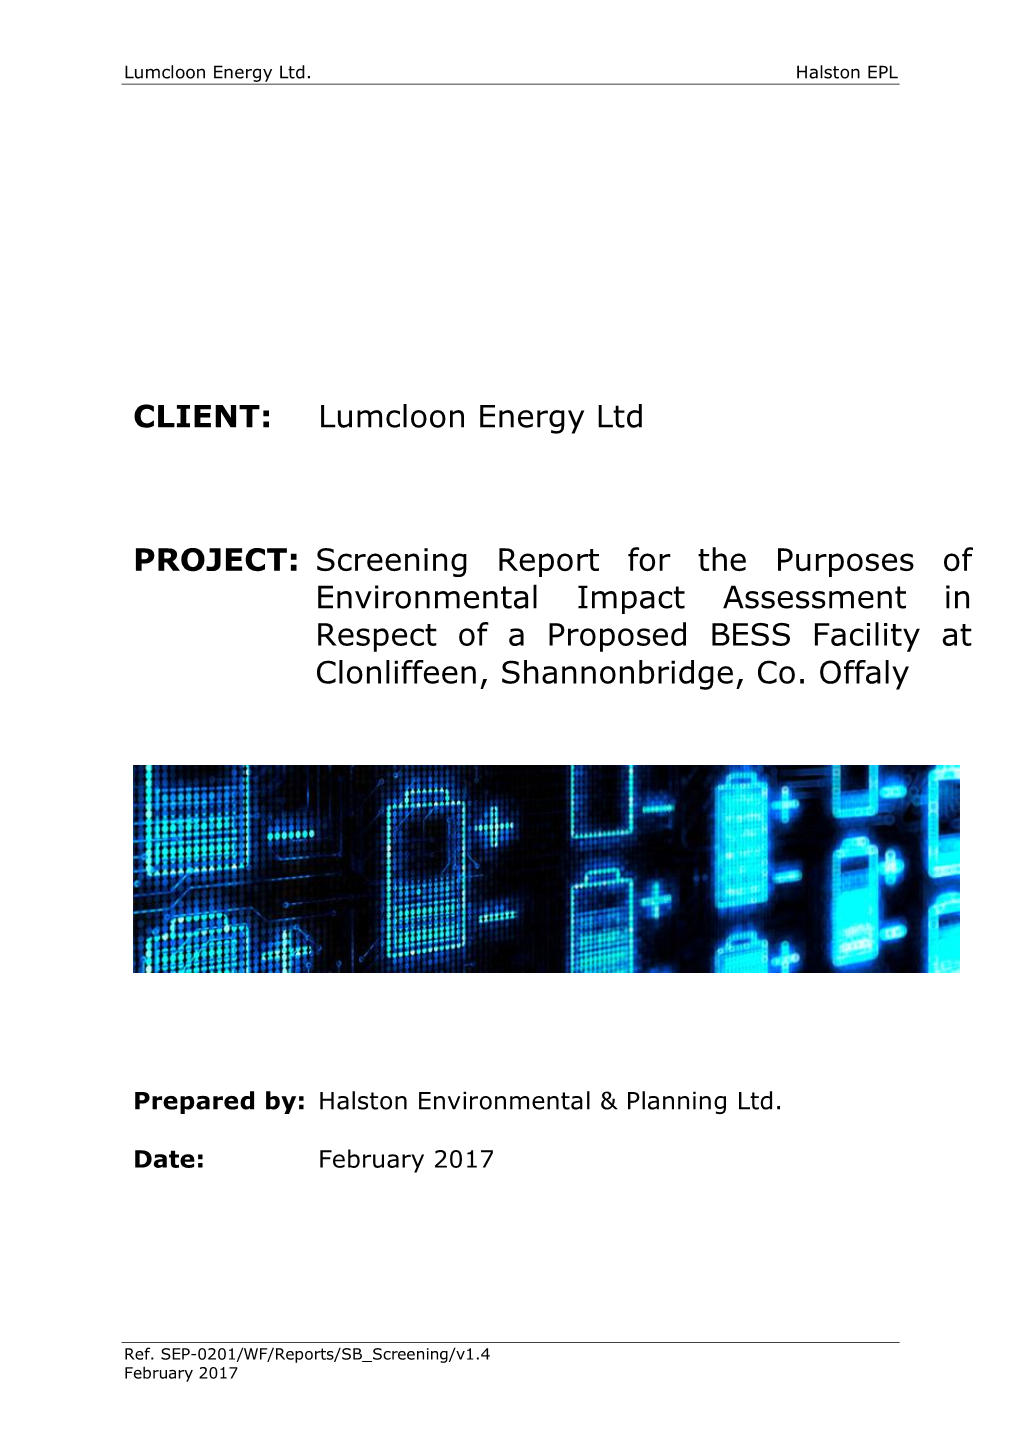 Screening Report for the Purposes of Environmental Impact Assessment in Respect of a Proposed BESS Facility at Clonliffeen, Shannonbridge, Co